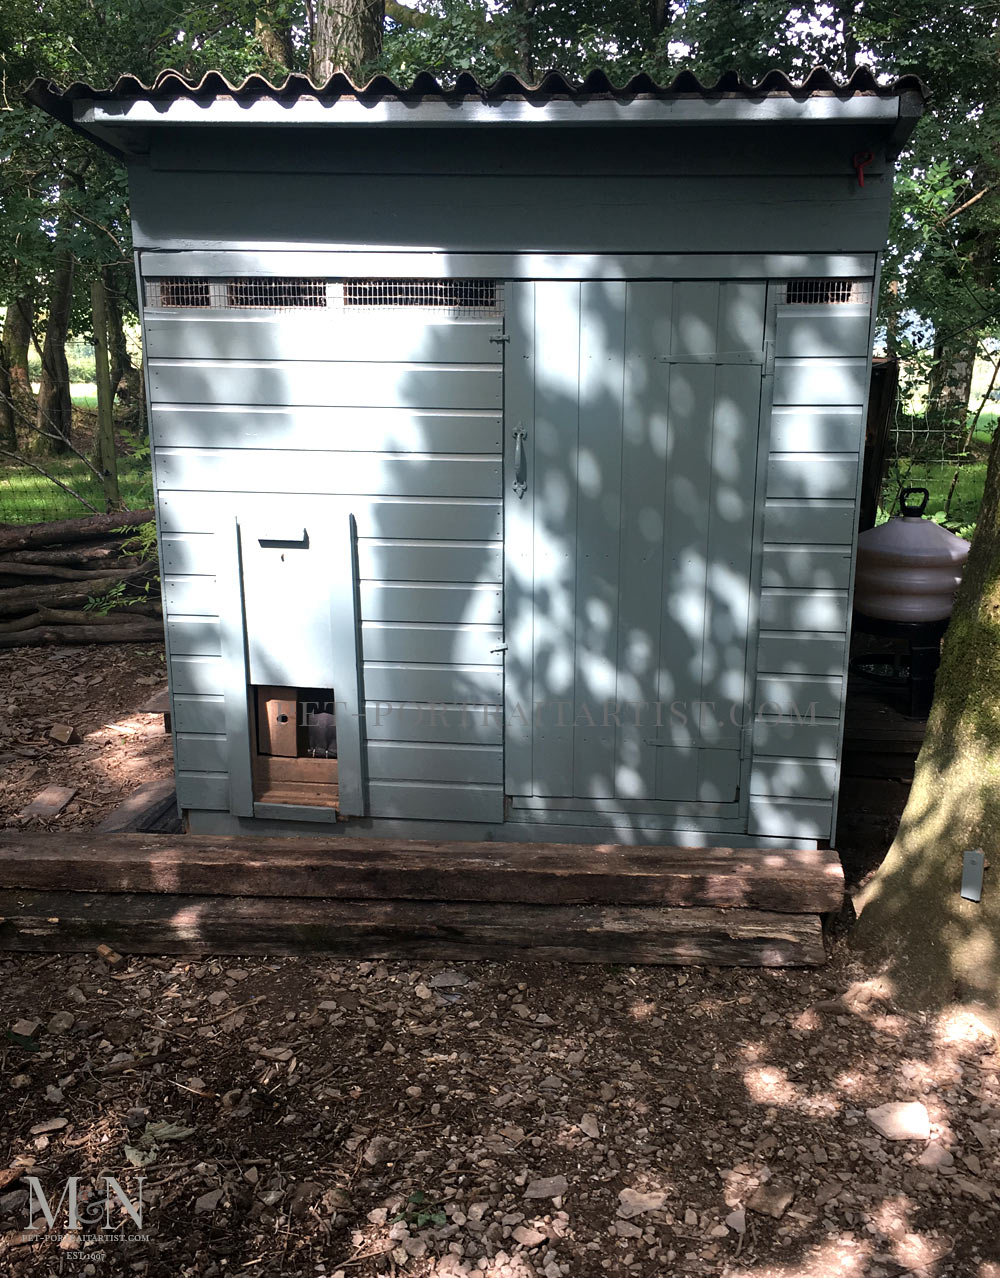 Extending the chicken shed